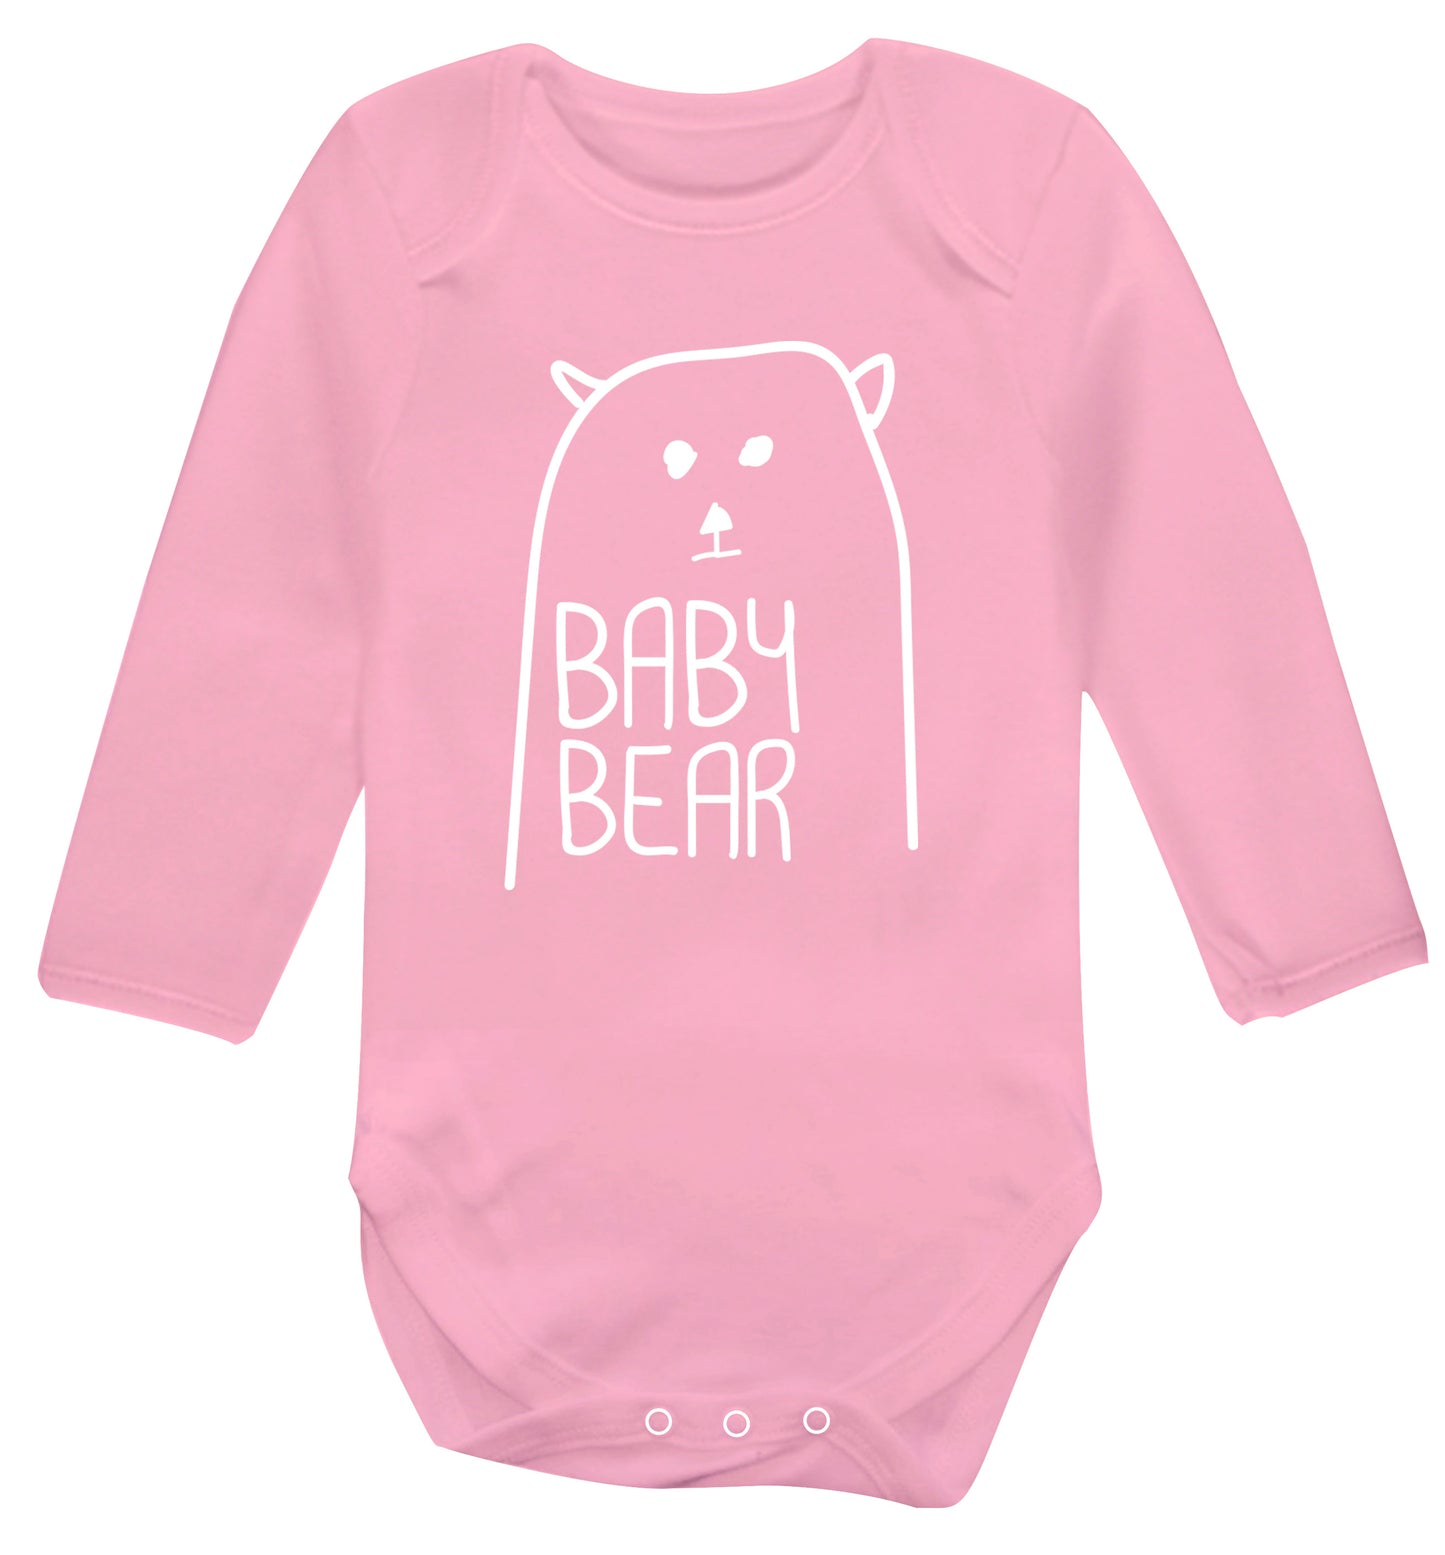 Baby bear Baby Vest long sleeved pale pink 6-12 months